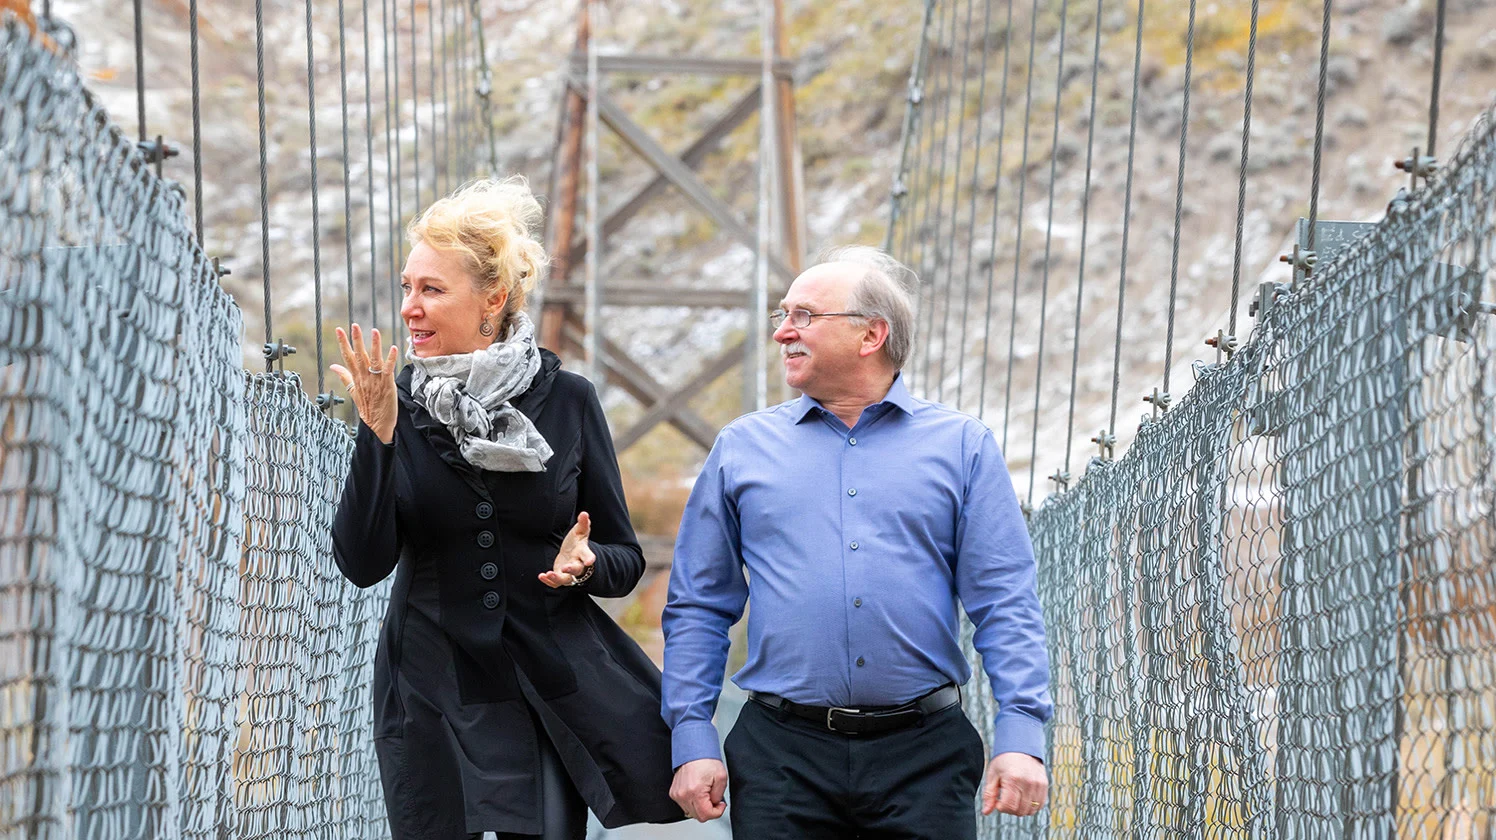 Drumheller Mayor Heather Colberg and local entrepreneur Brian Yanish say their town, known as the Dinosaur Capital of the World, is open for new business. Powered by the TELUS PureFibre network, residents and business owners now enjoy the same connection advantages of a major urban centre.